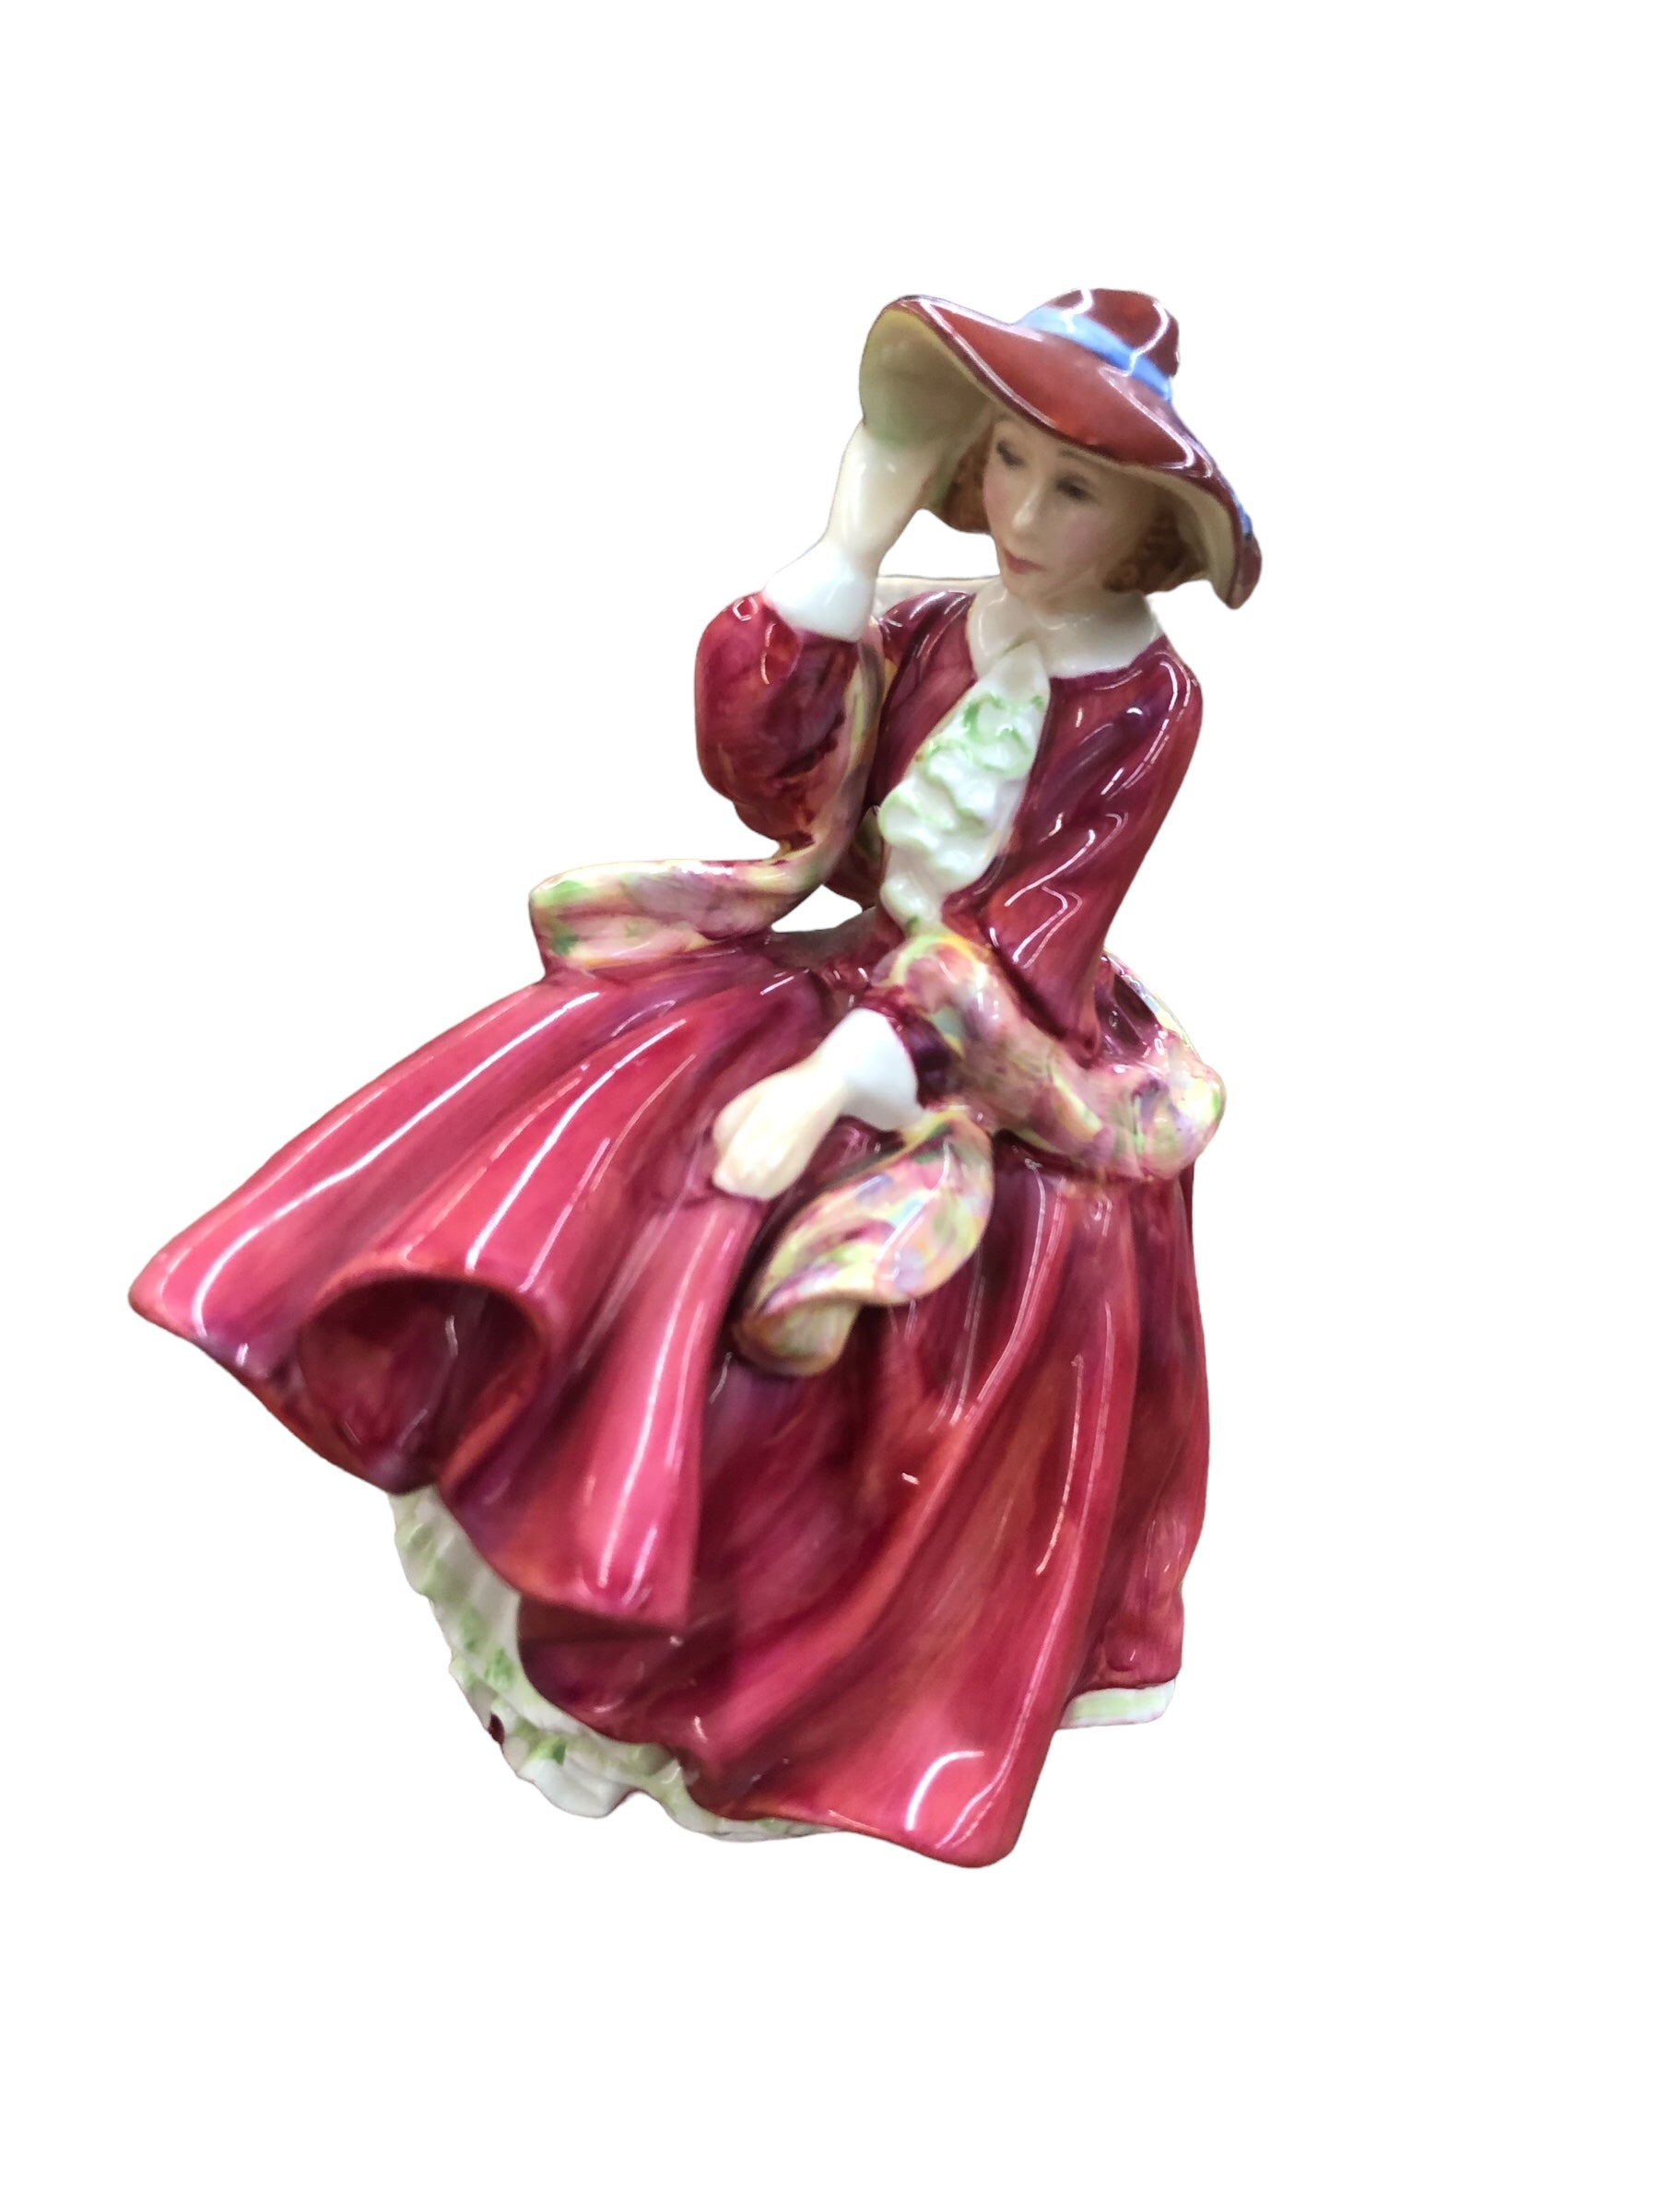 Royal Doulton "Top O the Hill" Figurine